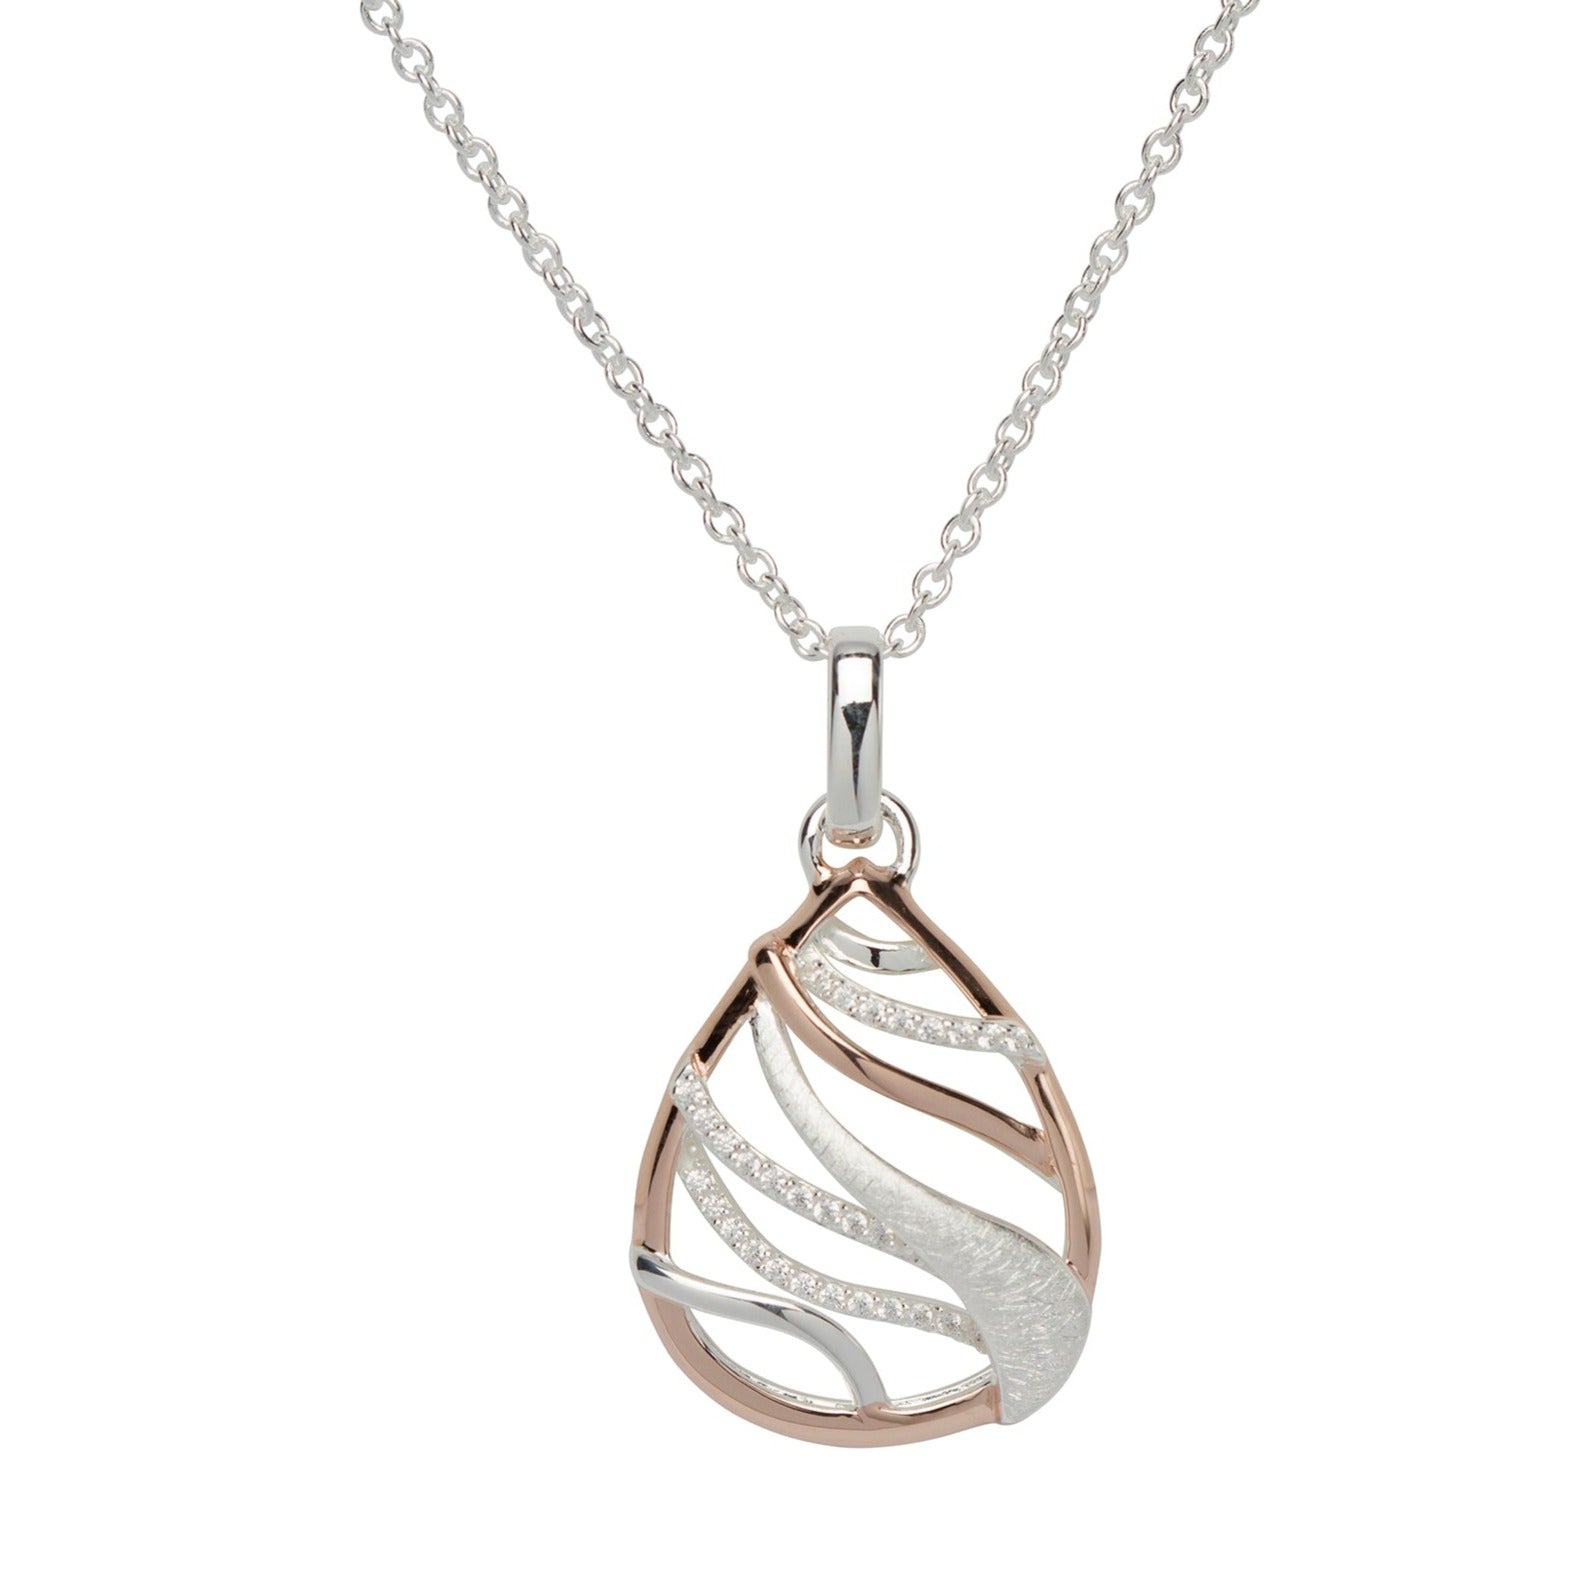 Unique & Co Sterling Silver, Rose Gold and Zirconia Drop Necklace